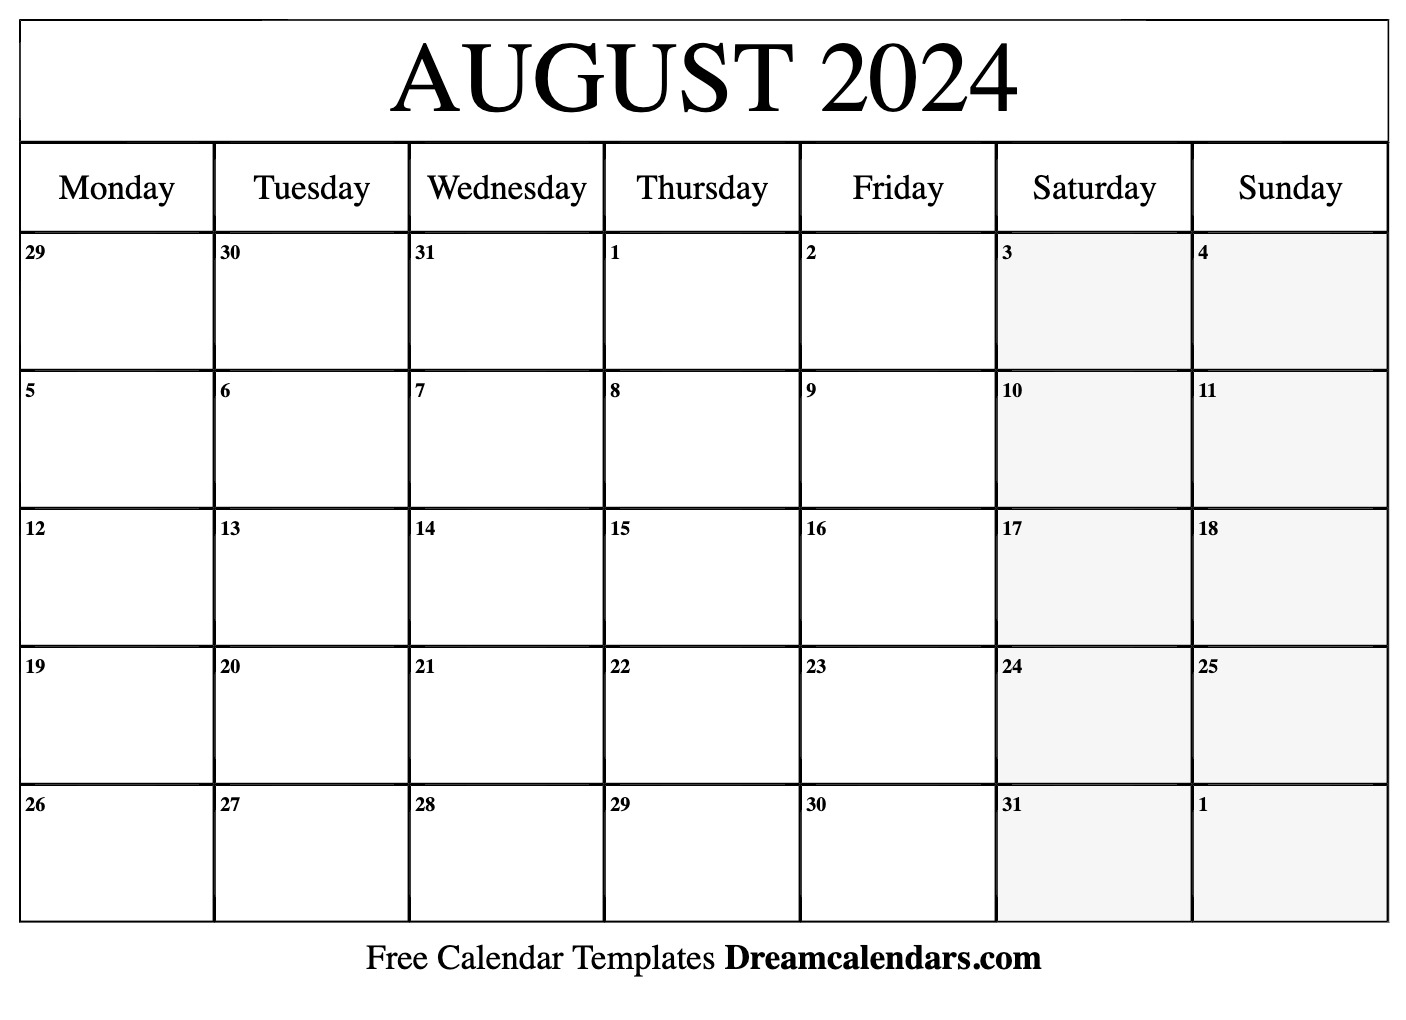 August 2024 Calendar | Free Blank Printable With Holidays for Free Printable August 2024 Calendar